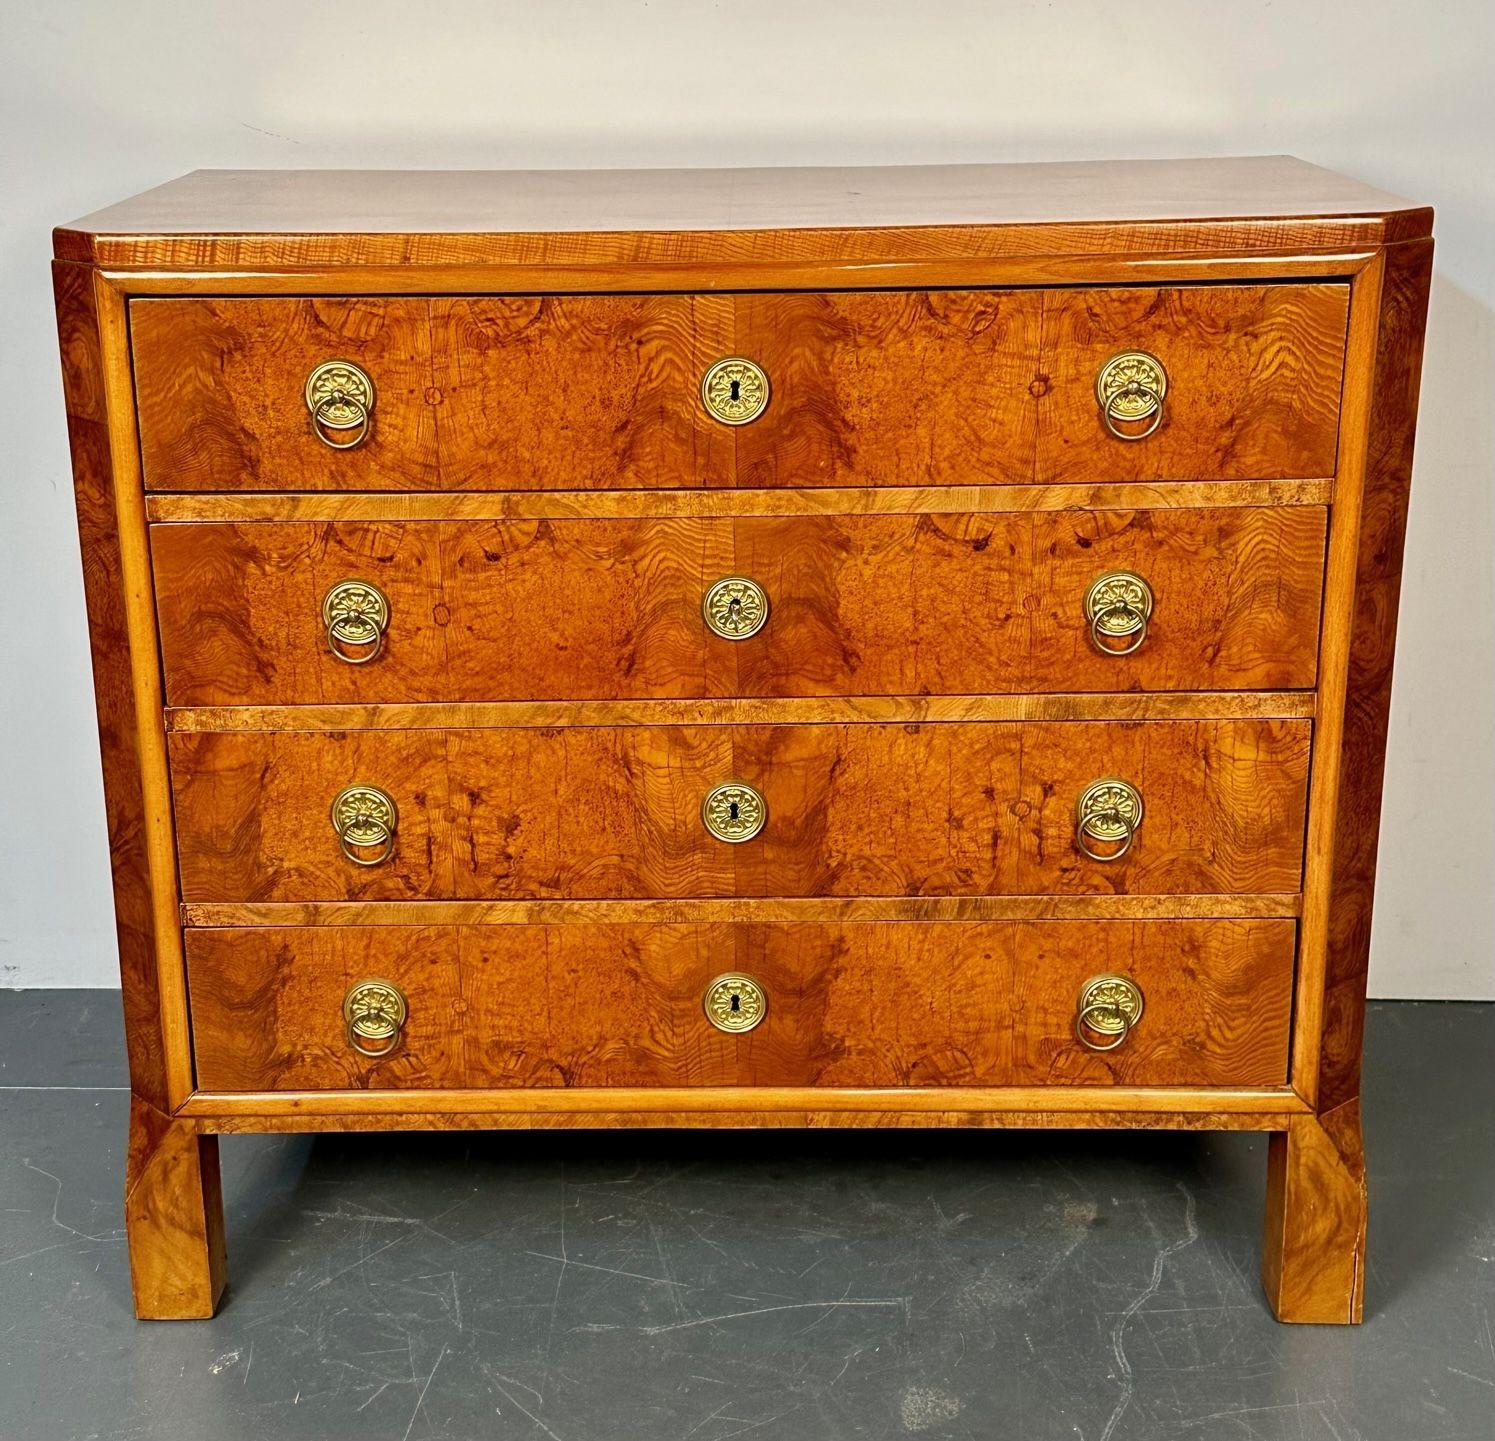 Refinished Biedermeier Four Drawer Satin Birch Chest, Dresser or Commode, 1850s

The whole of fine Satin Birch having been hand rubbed French polished to its original glory days. The case having four graduating drawers all with bronze drawer pulls